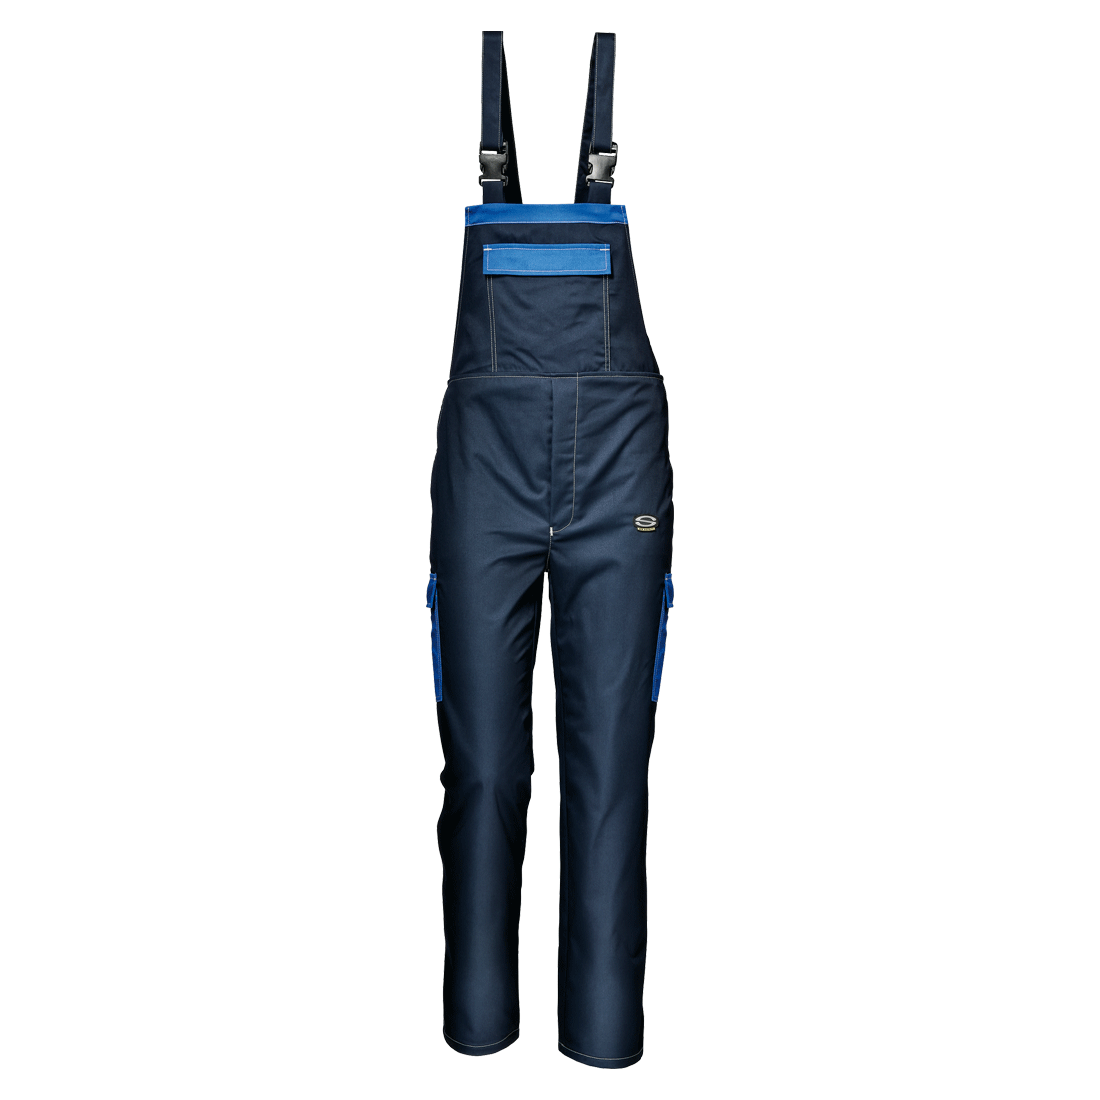 | coveralls Sir Work bib pants System & Safety